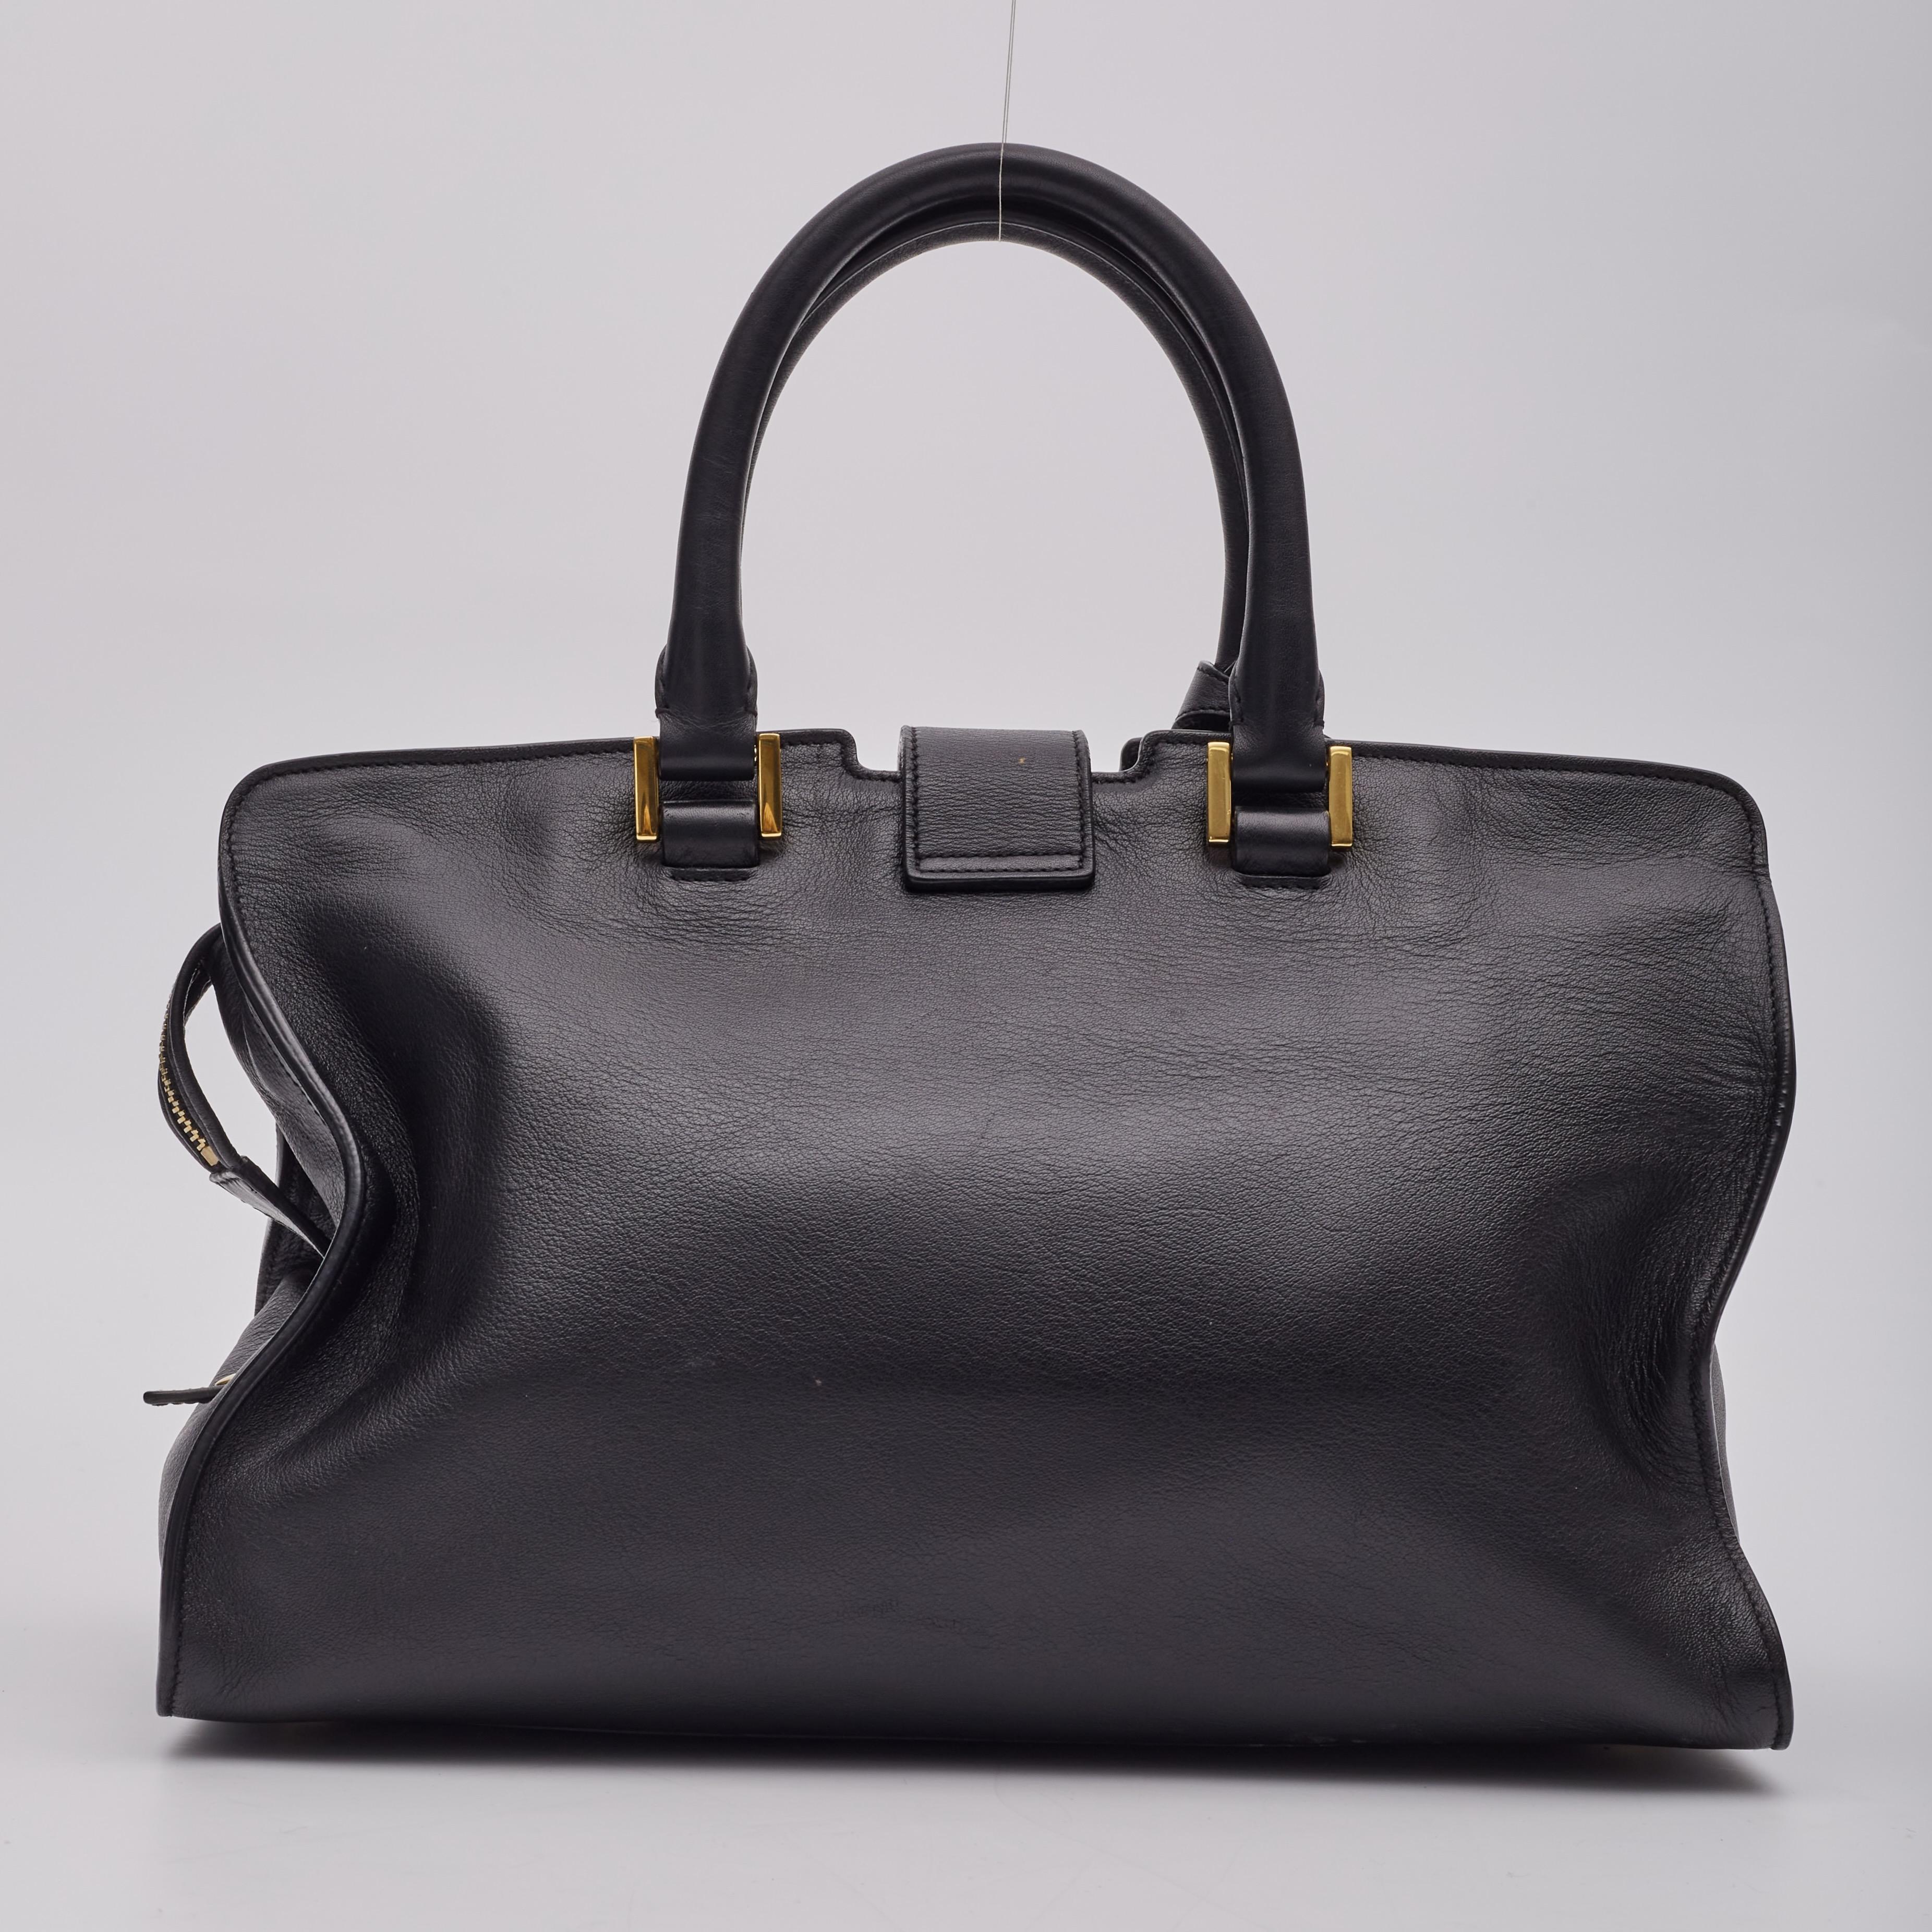 Saint Laurent Black Smooth Calfskin Leather Small Cabas Classic Y Bag In Good Condition For Sale In Montreal, Quebec